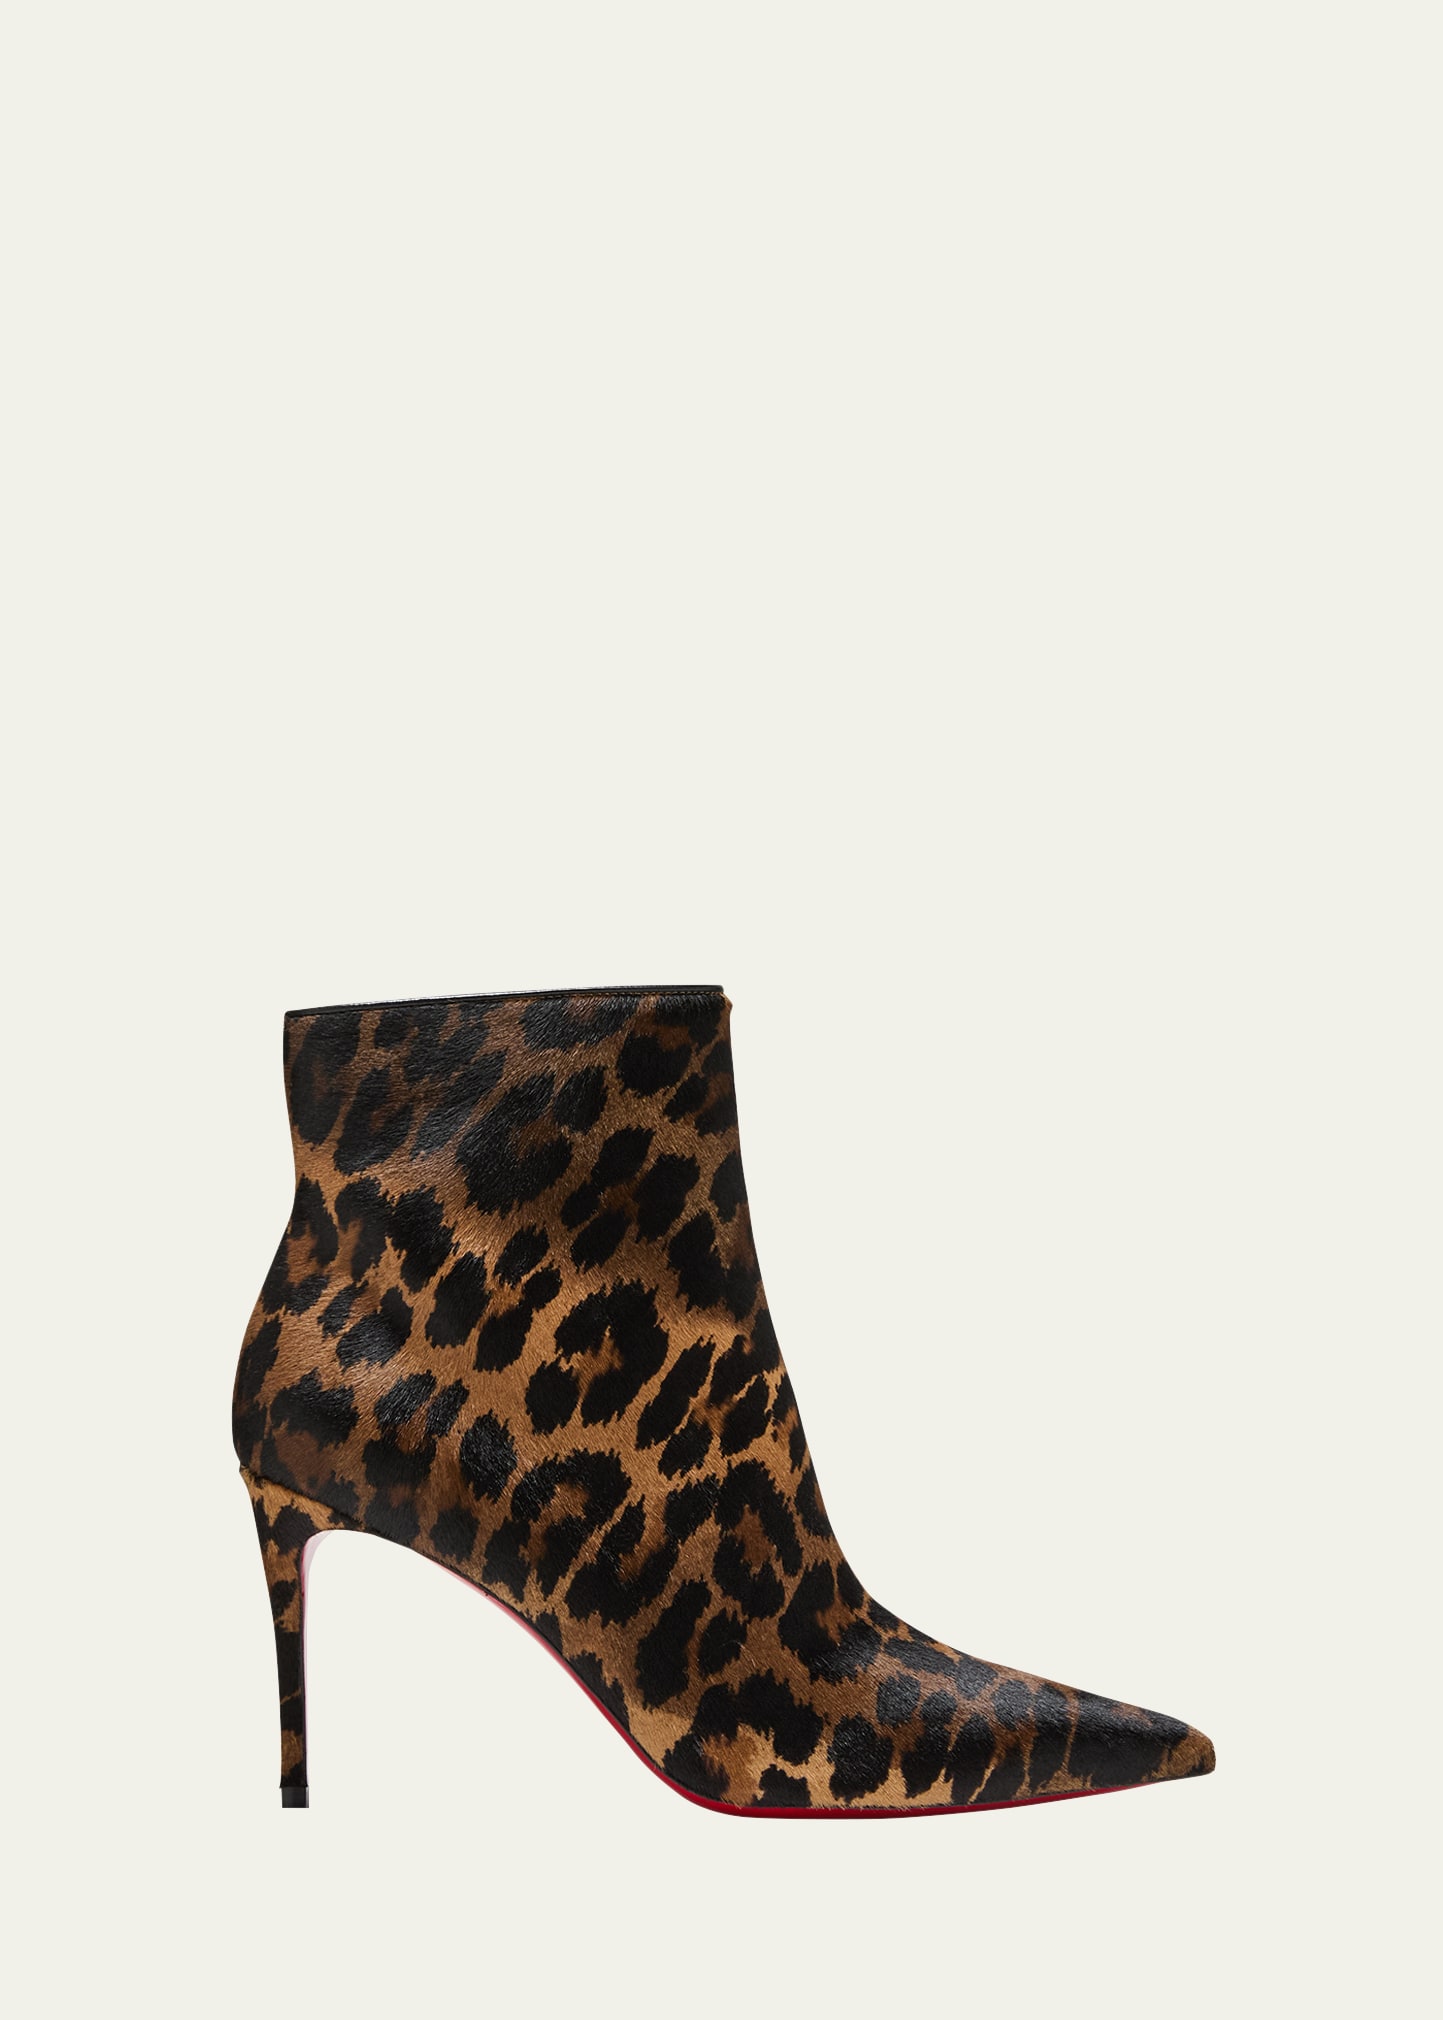 CHRISTIAN LOUBOUTIN SO KATE LEOPARD SUEDE RED SOLE BOOTIES